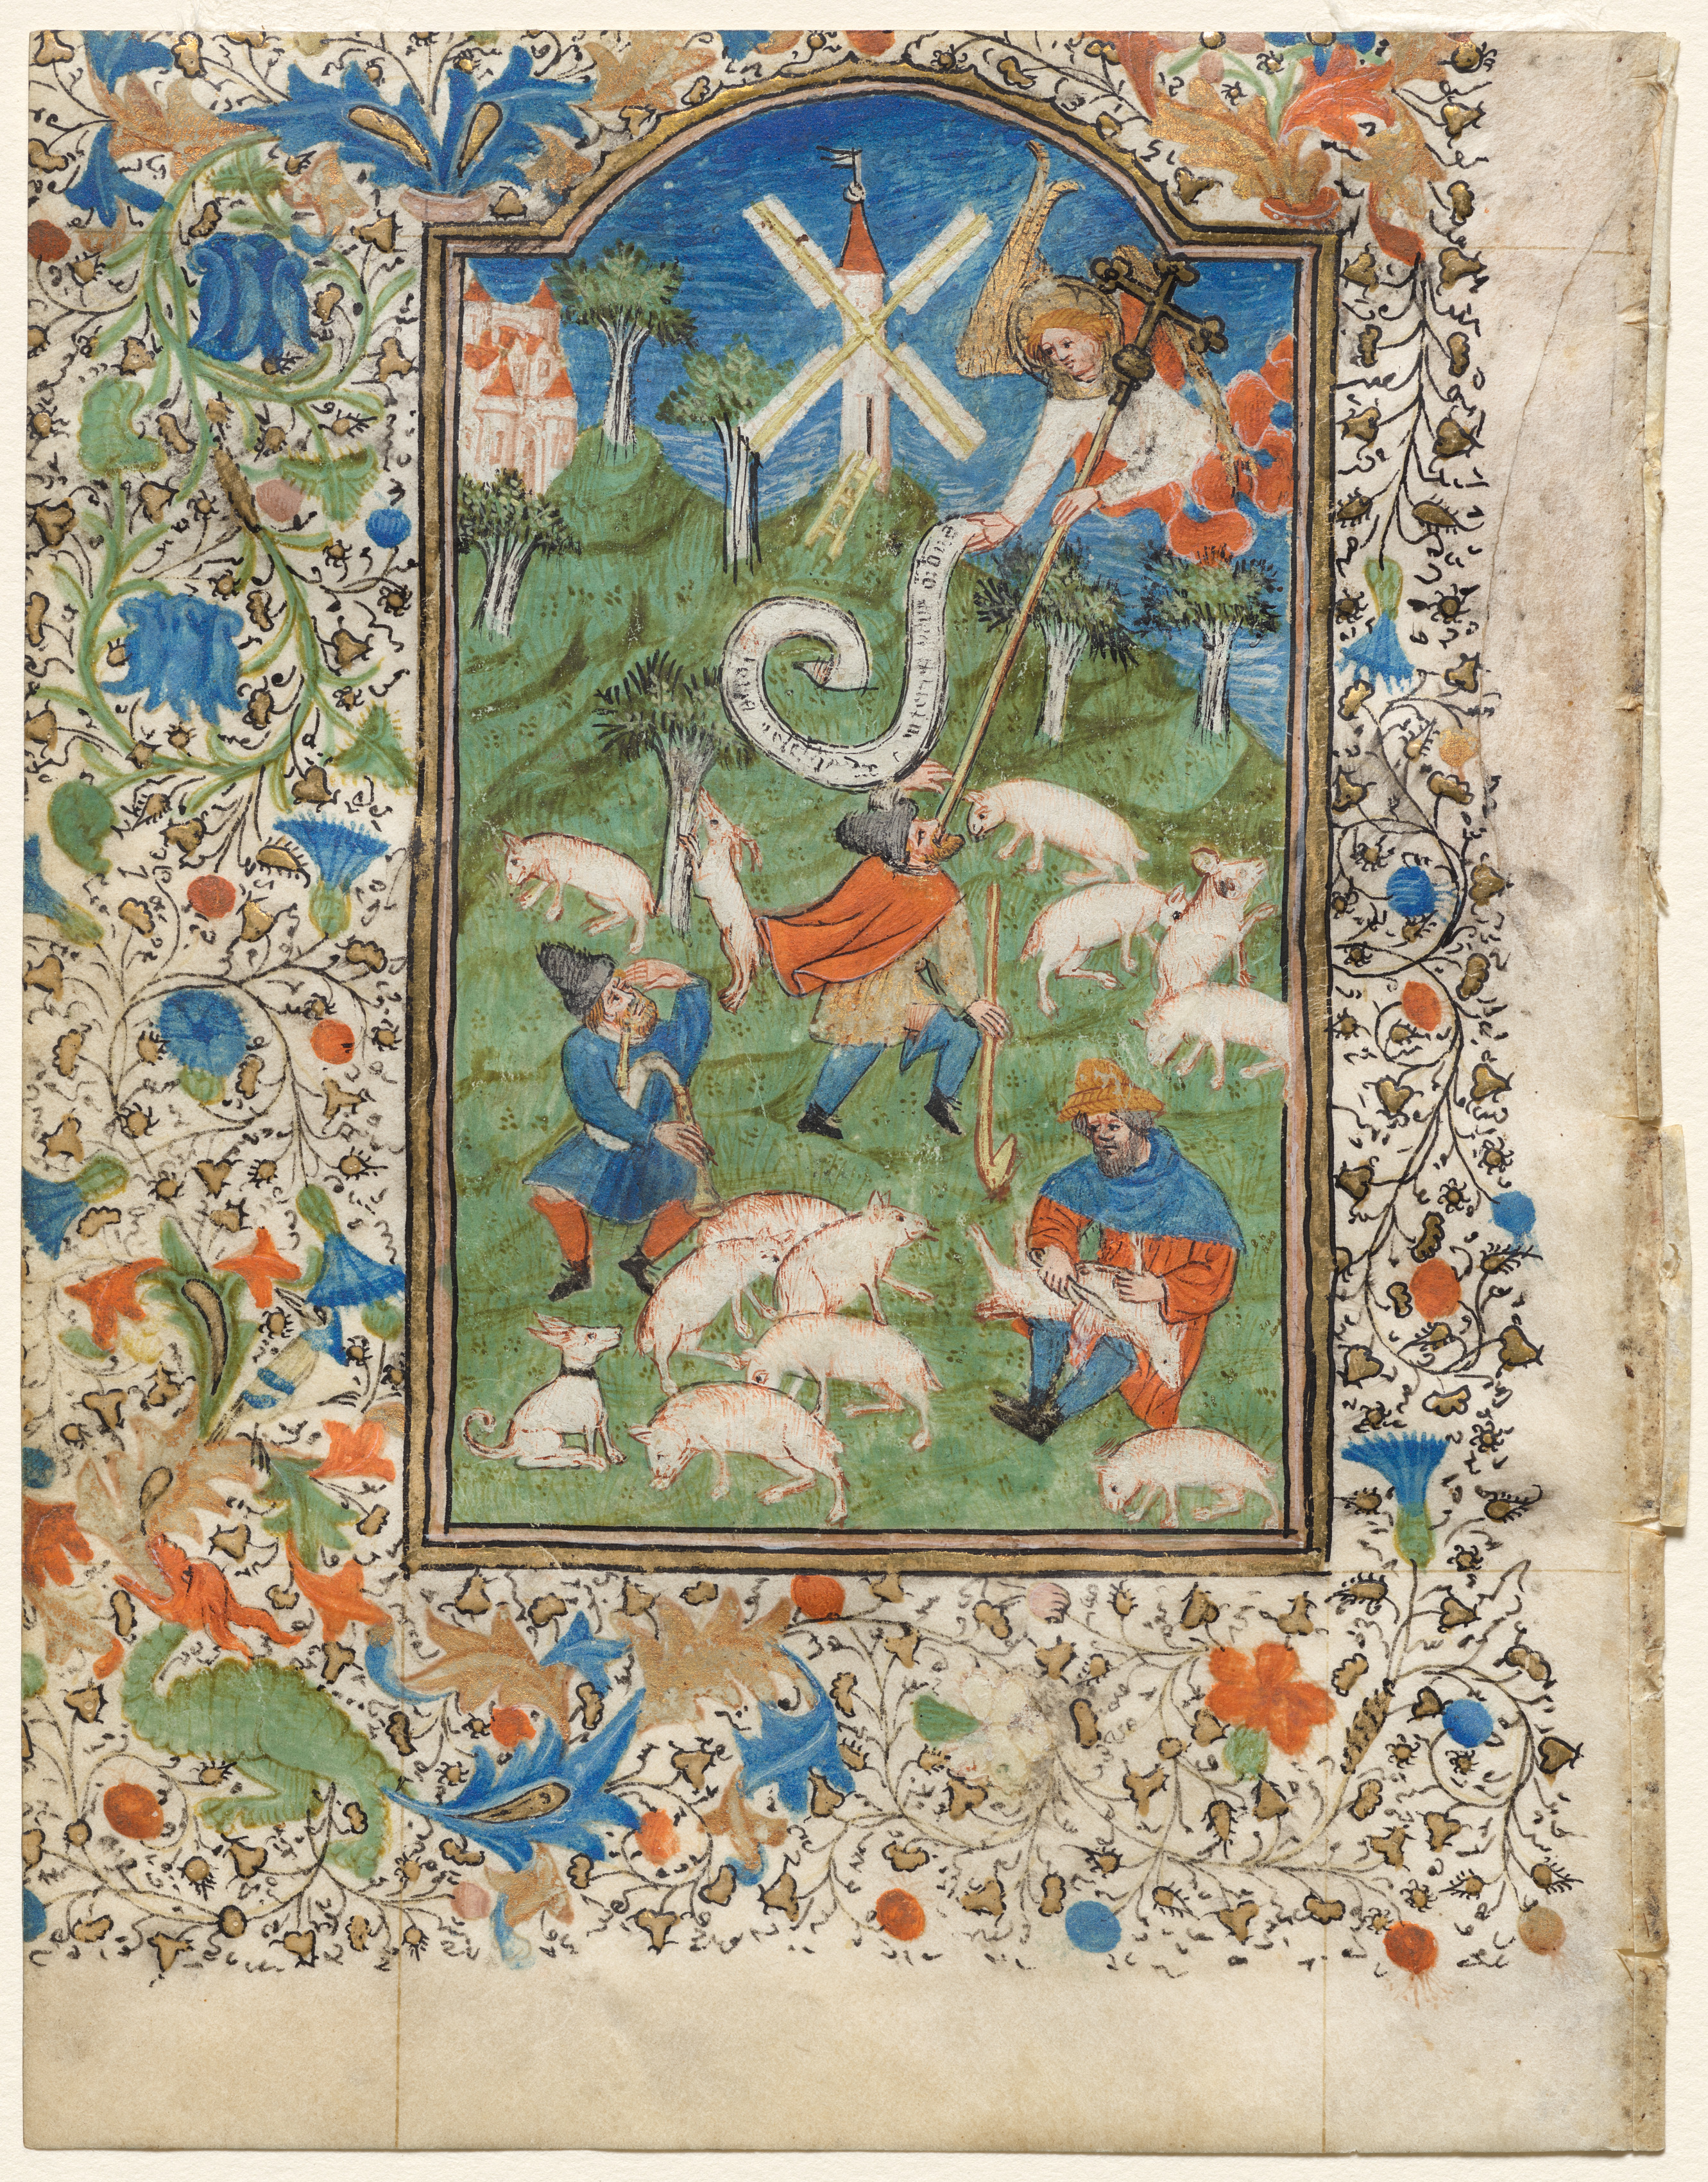 Annunciation to the Shepherds: Leaf from a Book of Hours (1 of 6 Excised Leaves)